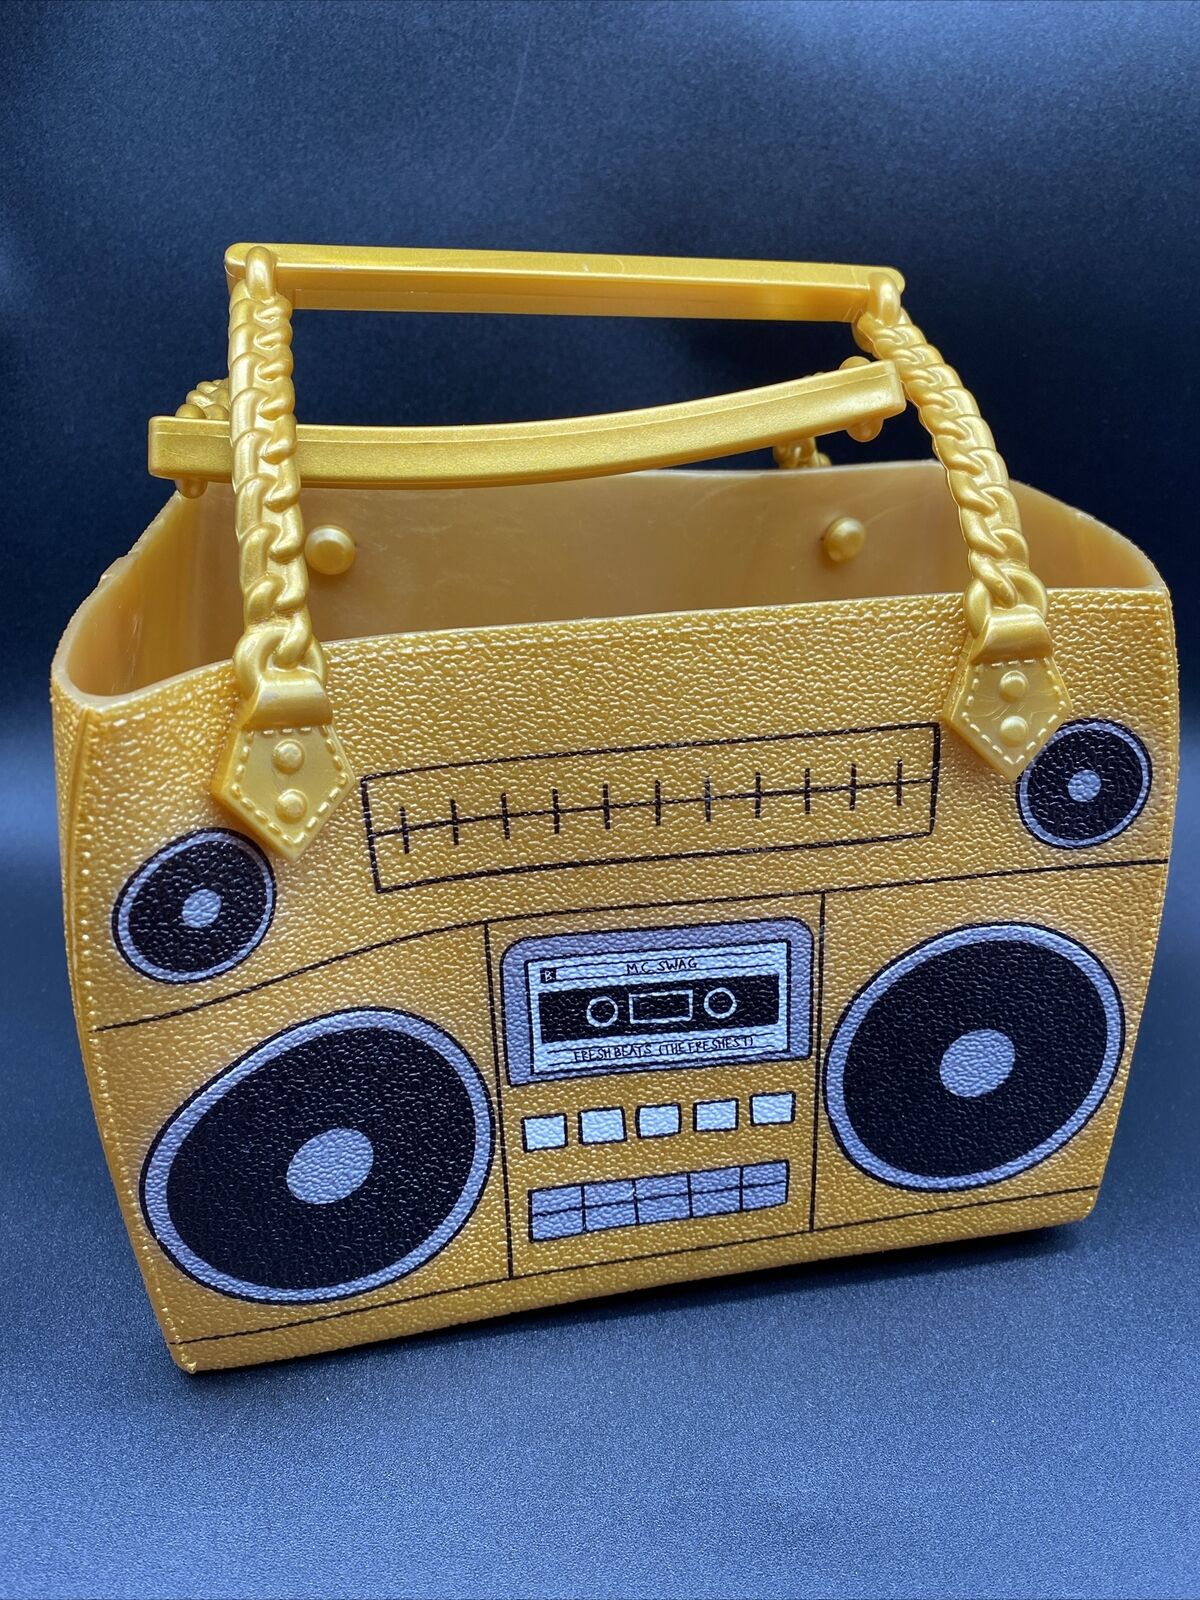 Cosplay Purse OMG LOL Surprise Rubber Boombox Gold Bling 2019 8”x6”x5”